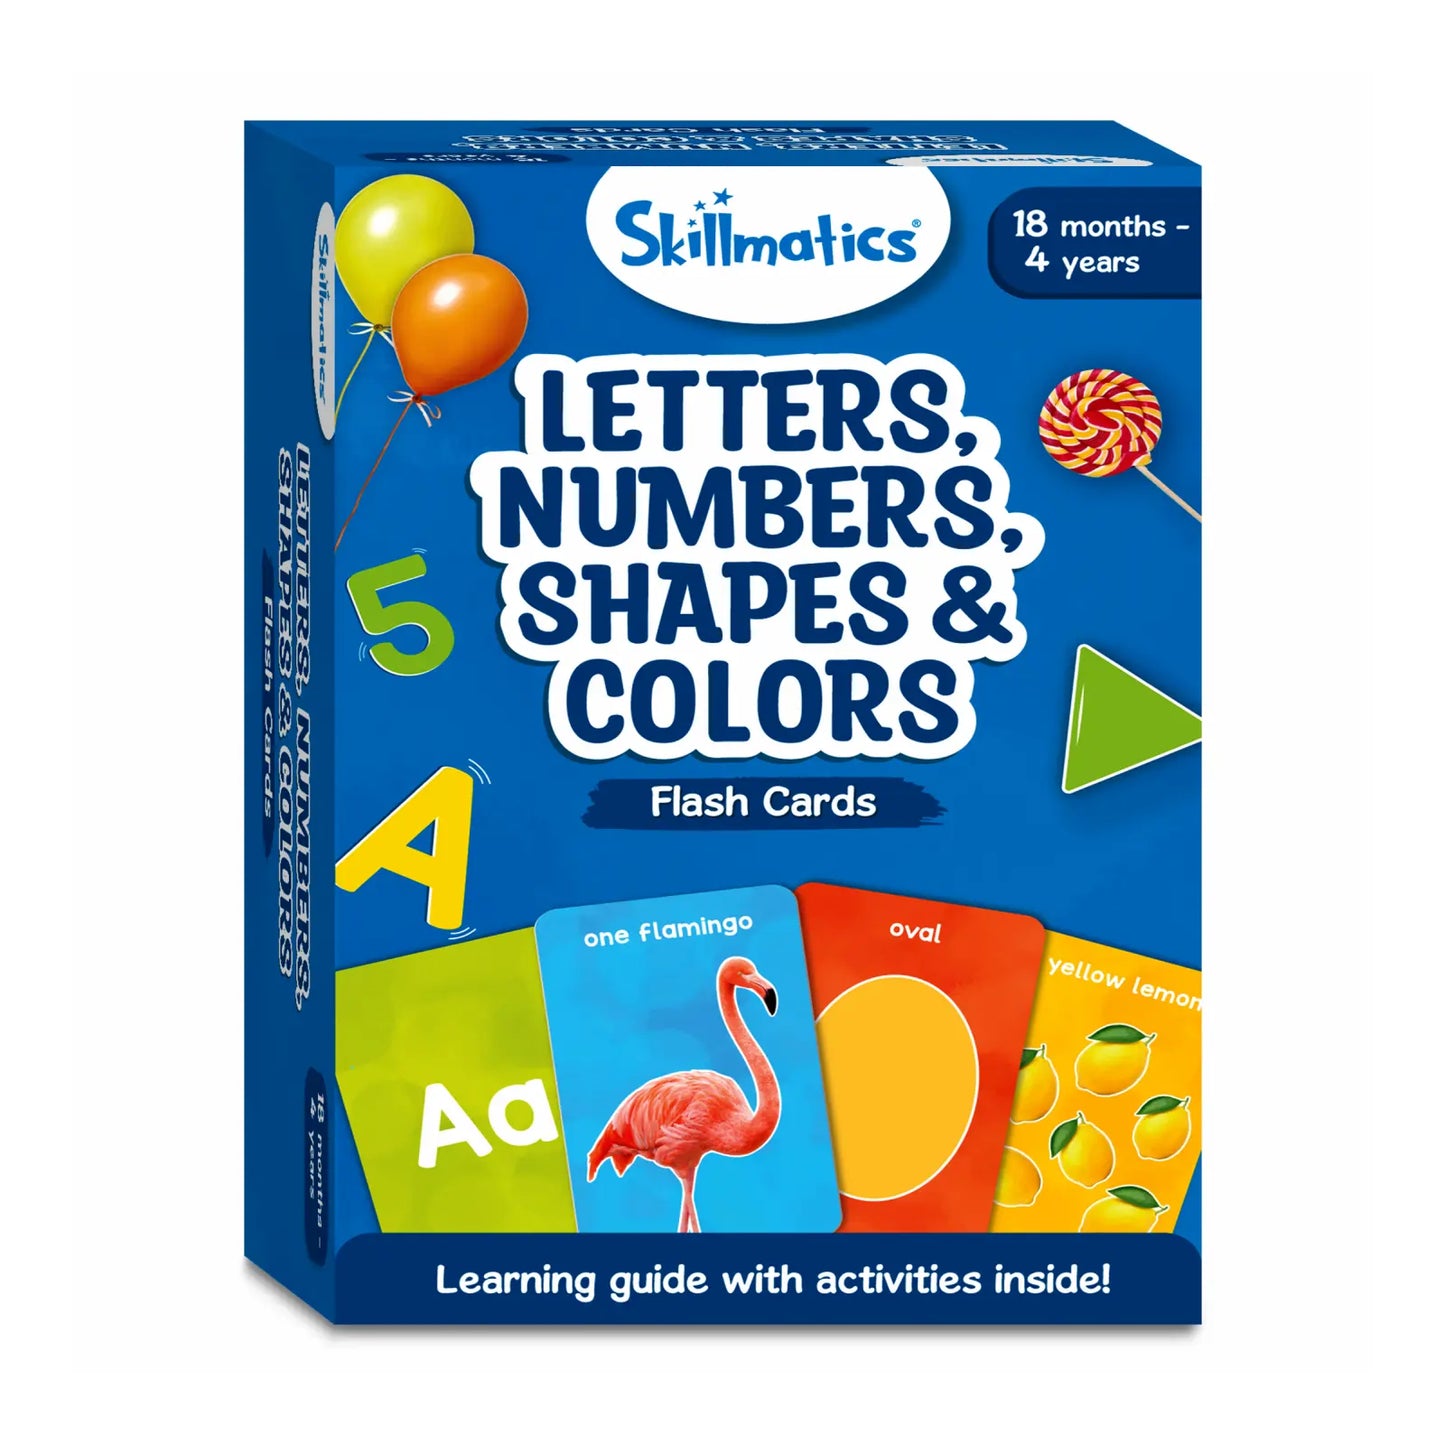 Flash Cards for toddlers: Letters, Numbers, Shapes & Colors (ages 1-4)